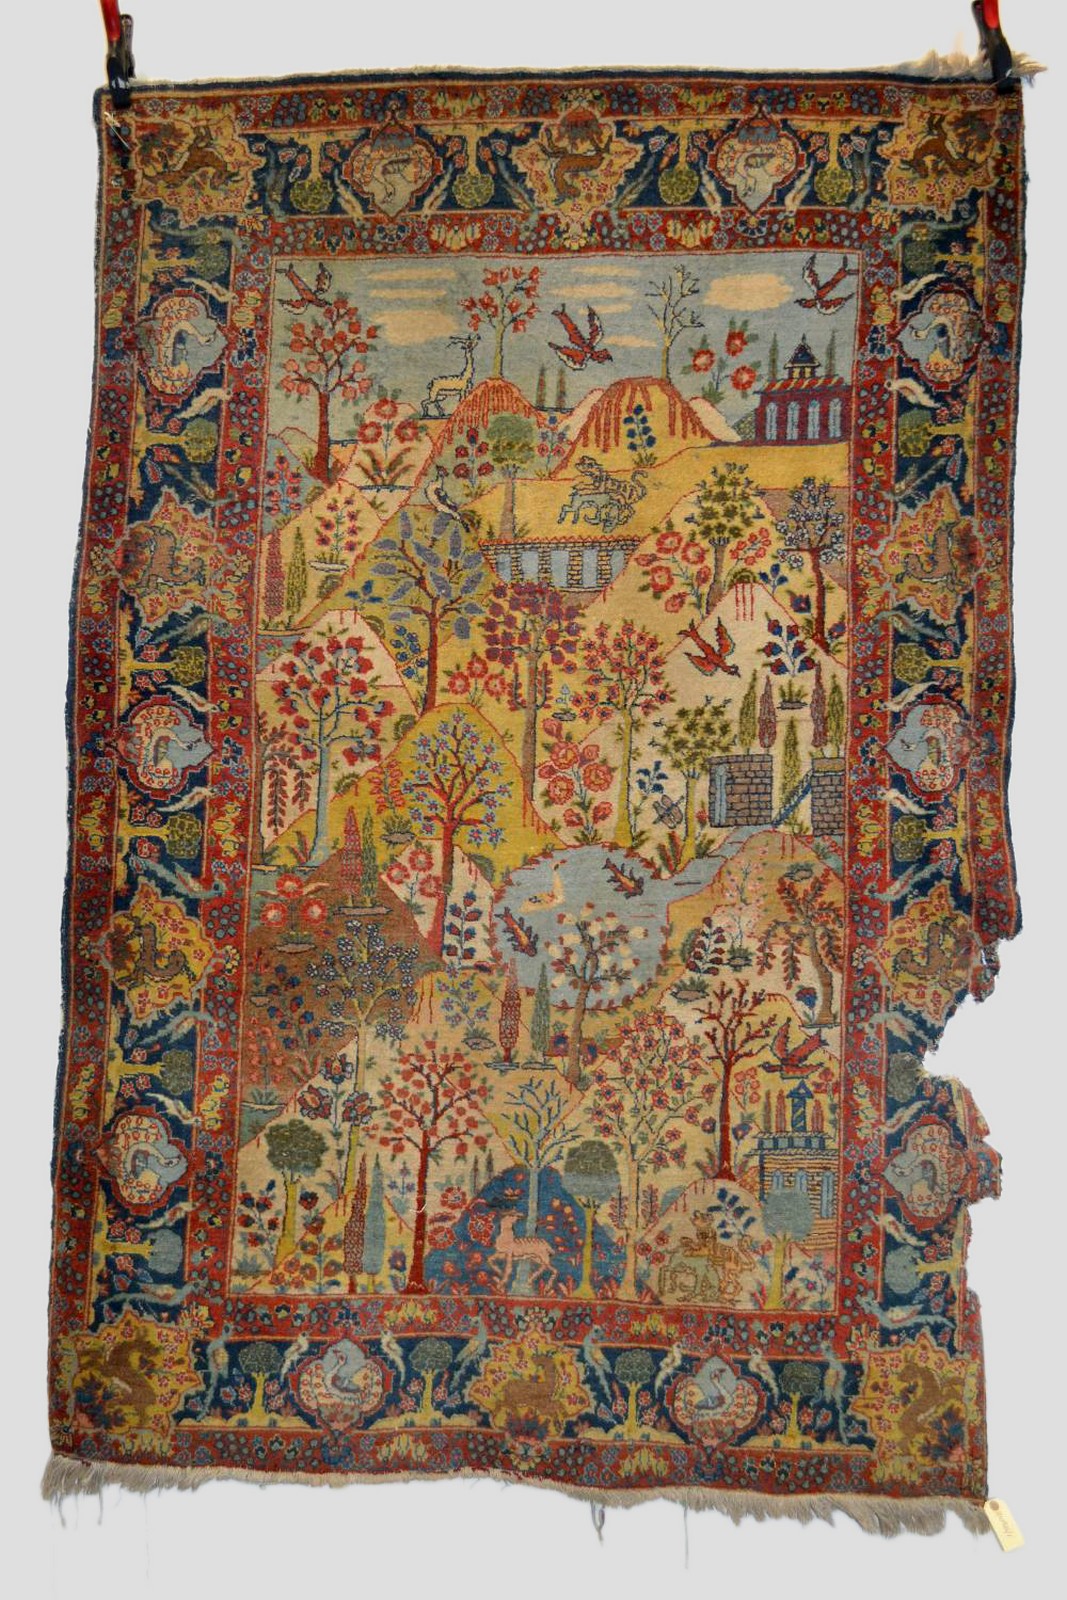 Tabriz pictorial rug, north west Persia, about 1930-50s, 6ft. 9in. x 4ft. 6in. 2.05m. x 1.37m.